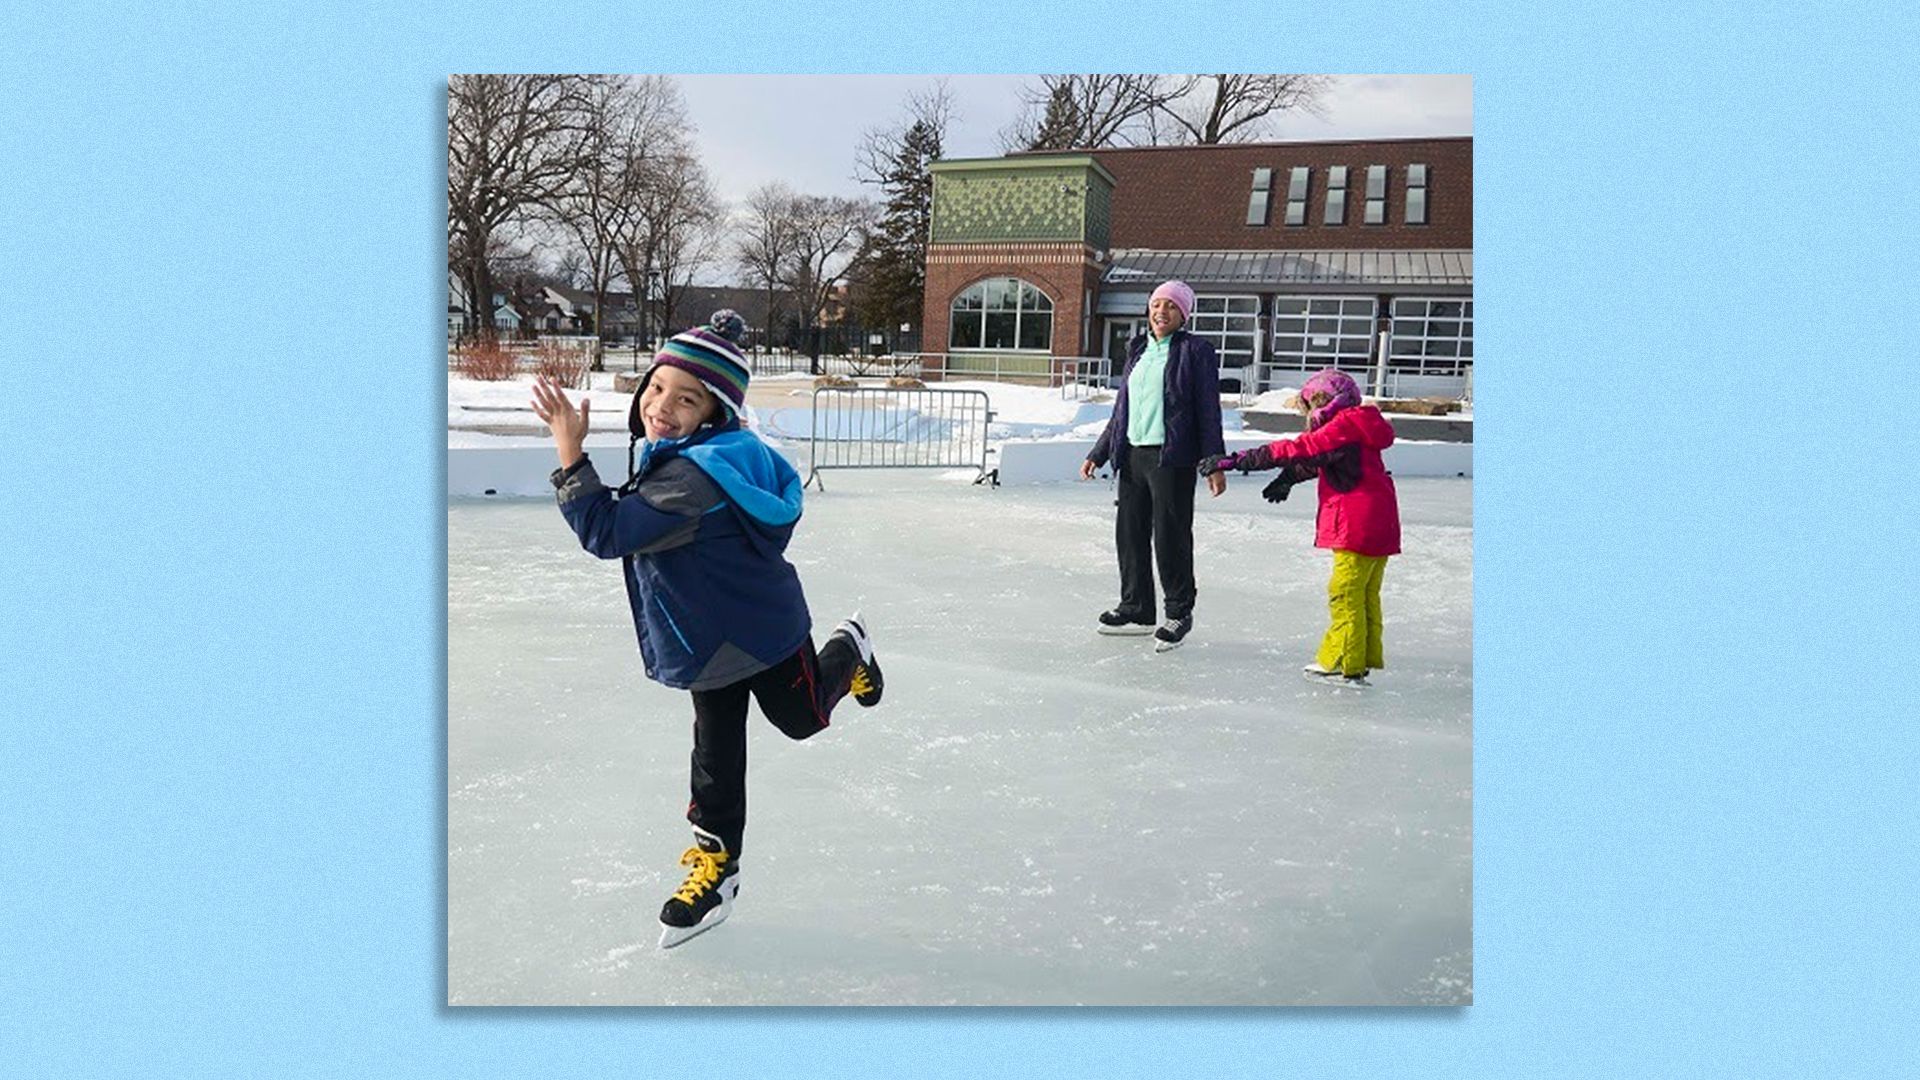 a boy skating on an ice rink happily